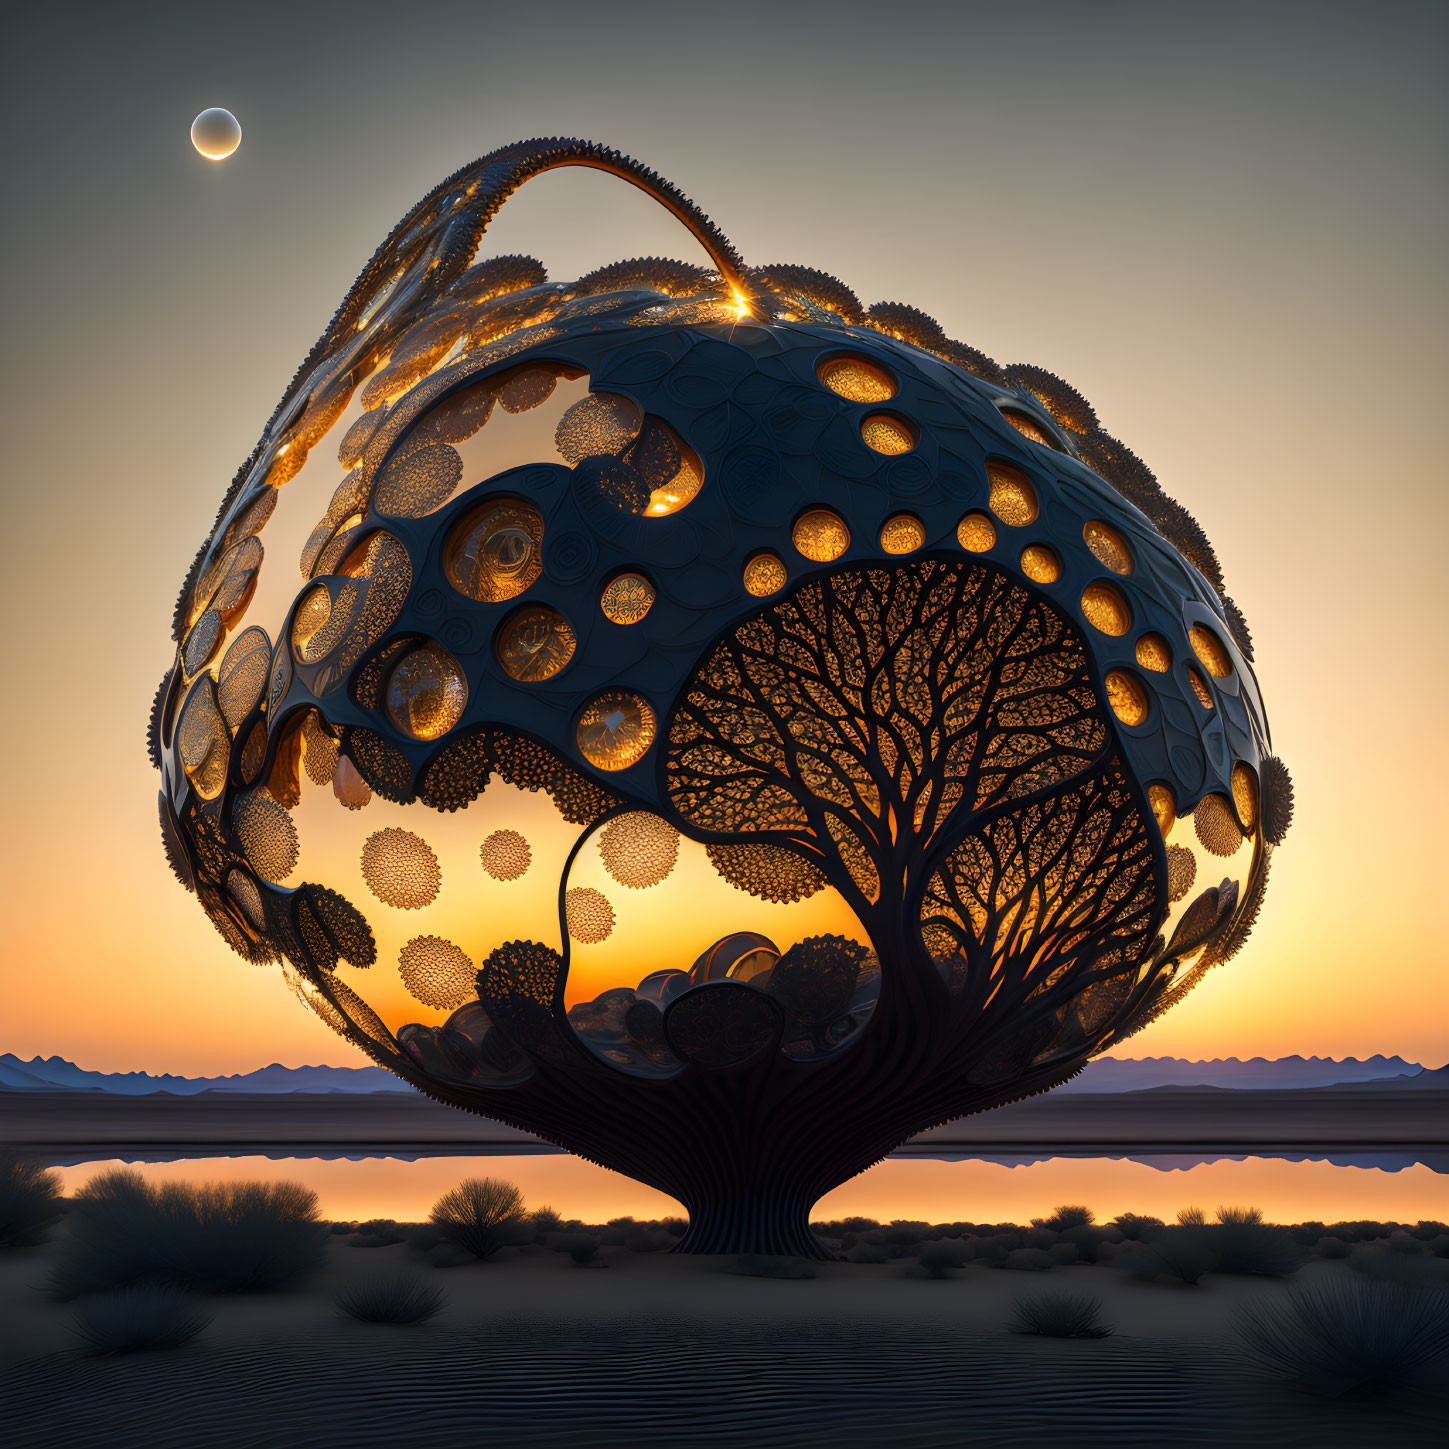 Surreal spherical structure with tree-like patterns in desert twilight.